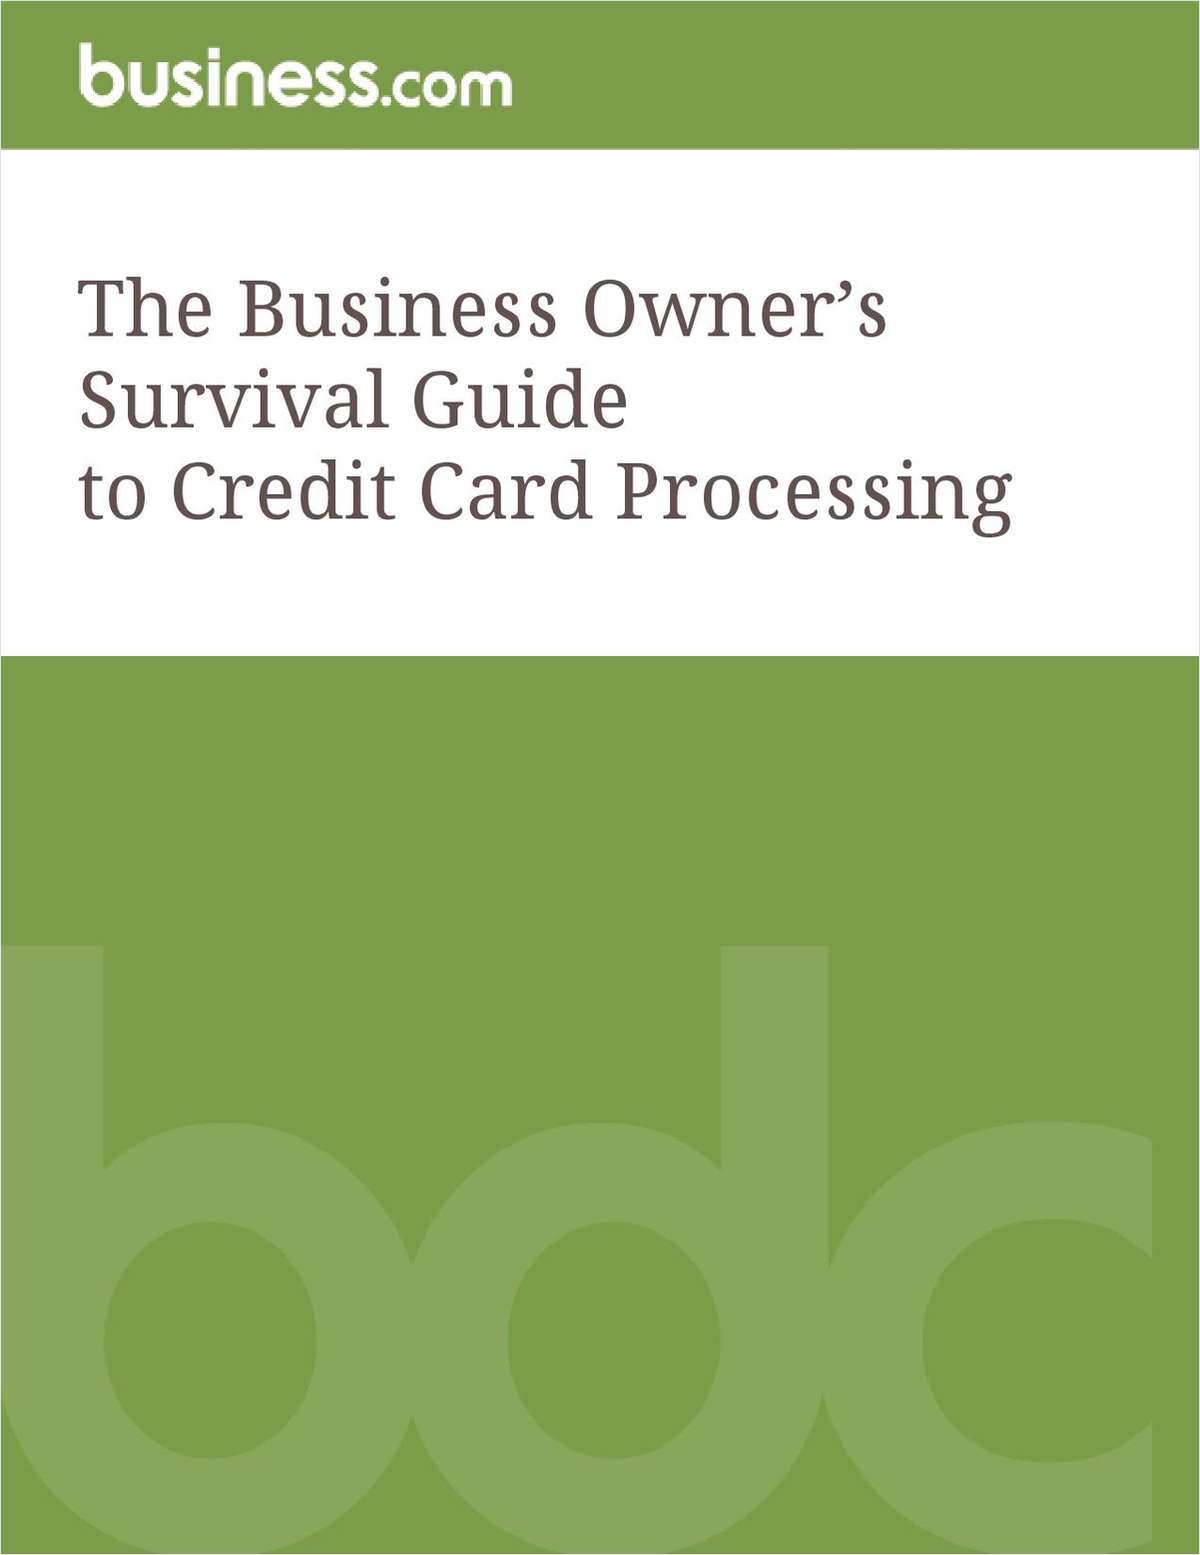 The Business Owner's Survival Guide to Credit Card Processing